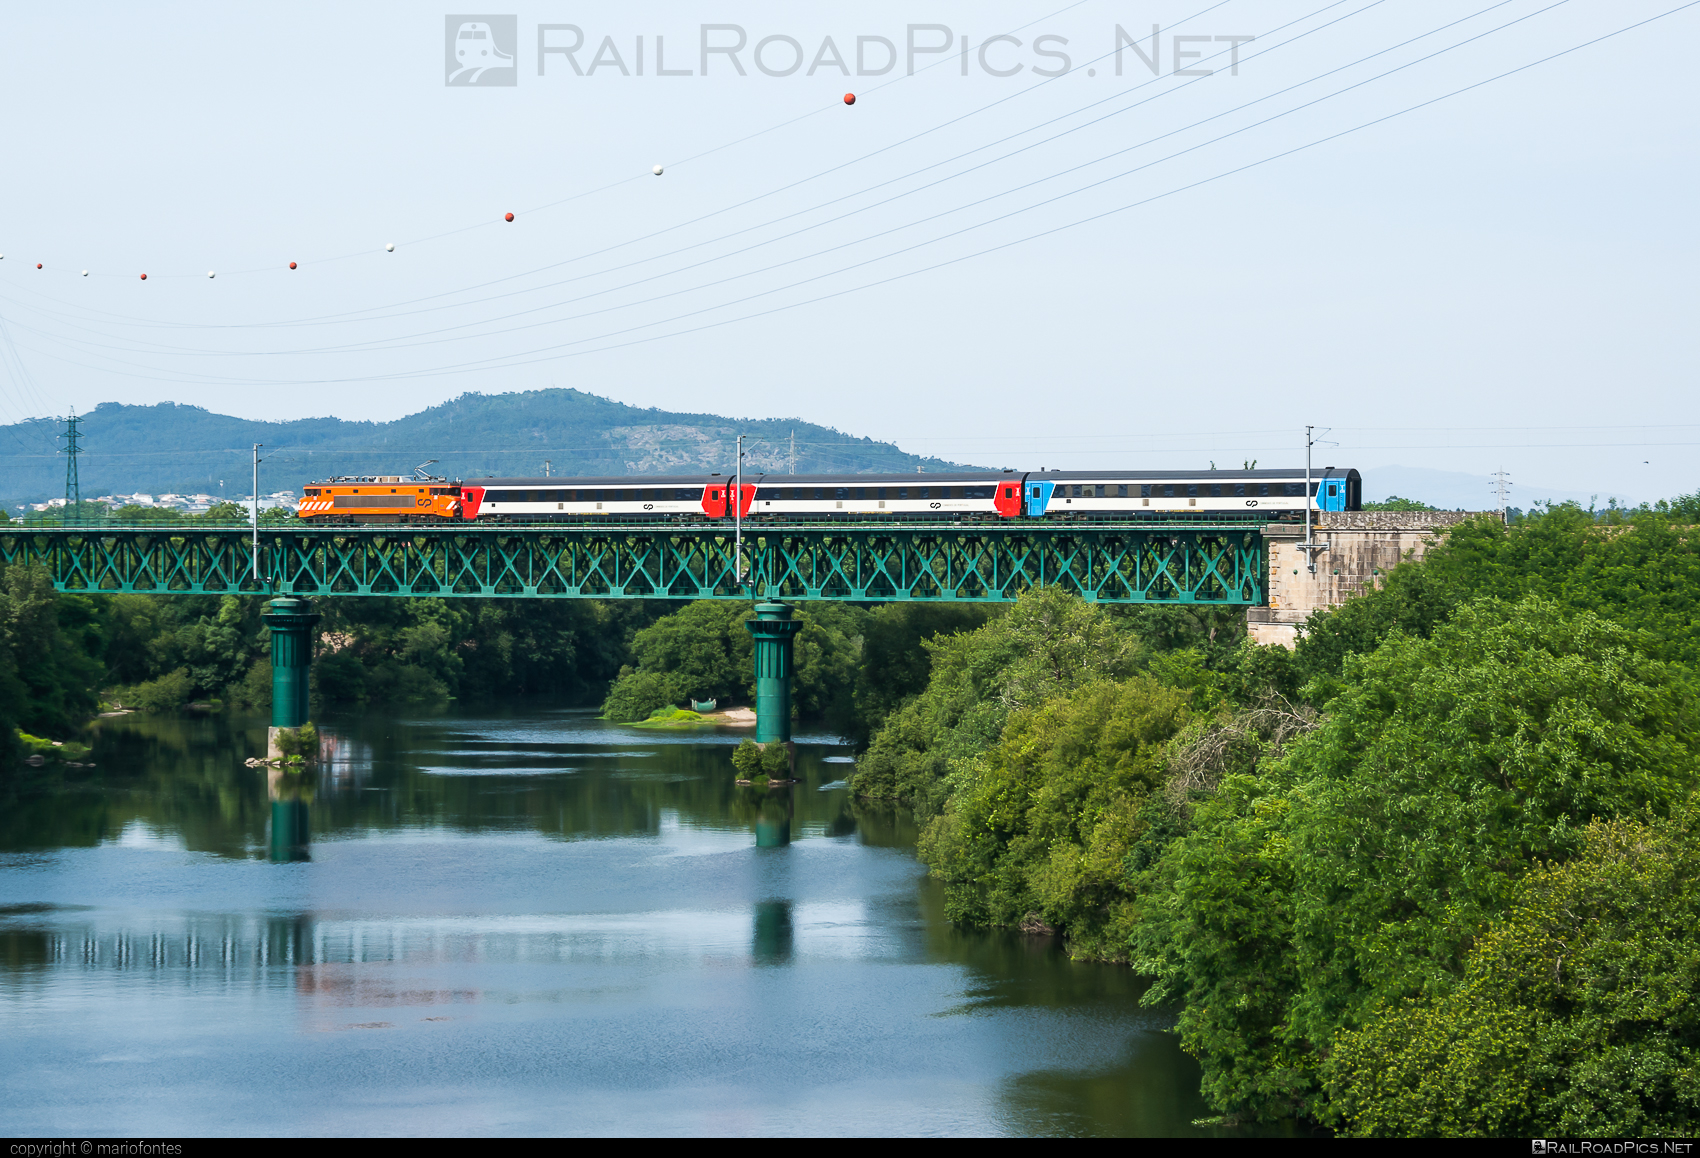 CP Class 2600 - 2607 operated by CP - Comboios de Portugal, E.P.E. #bridge #comboiosDePortugal #comboiosDePortugalEPE #cpClass2600 #nezCassee #sncfBB15000